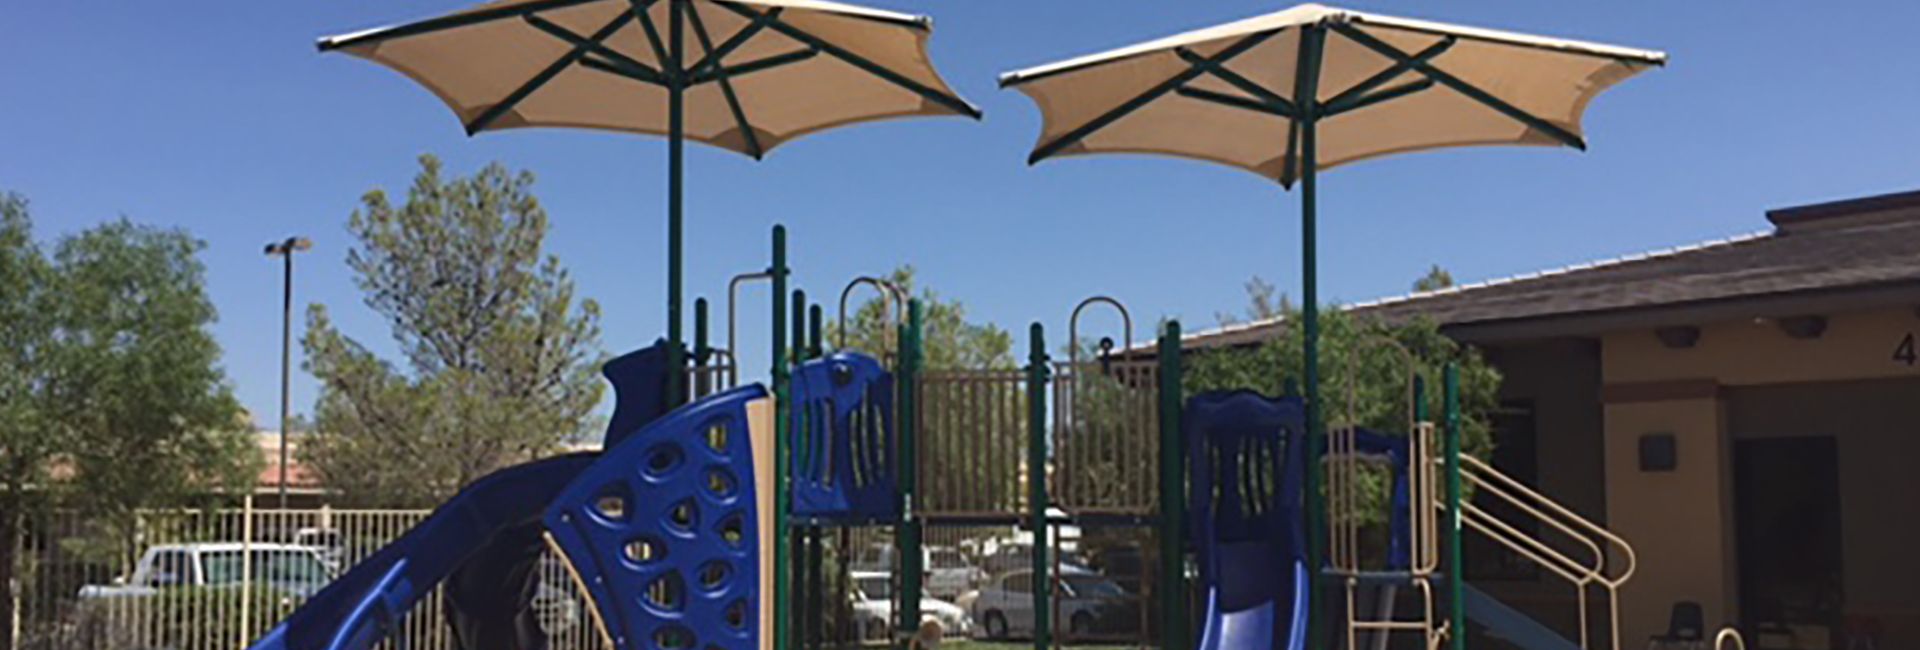 Featured image of image of a blue themed park with tan overhead structures during the summer